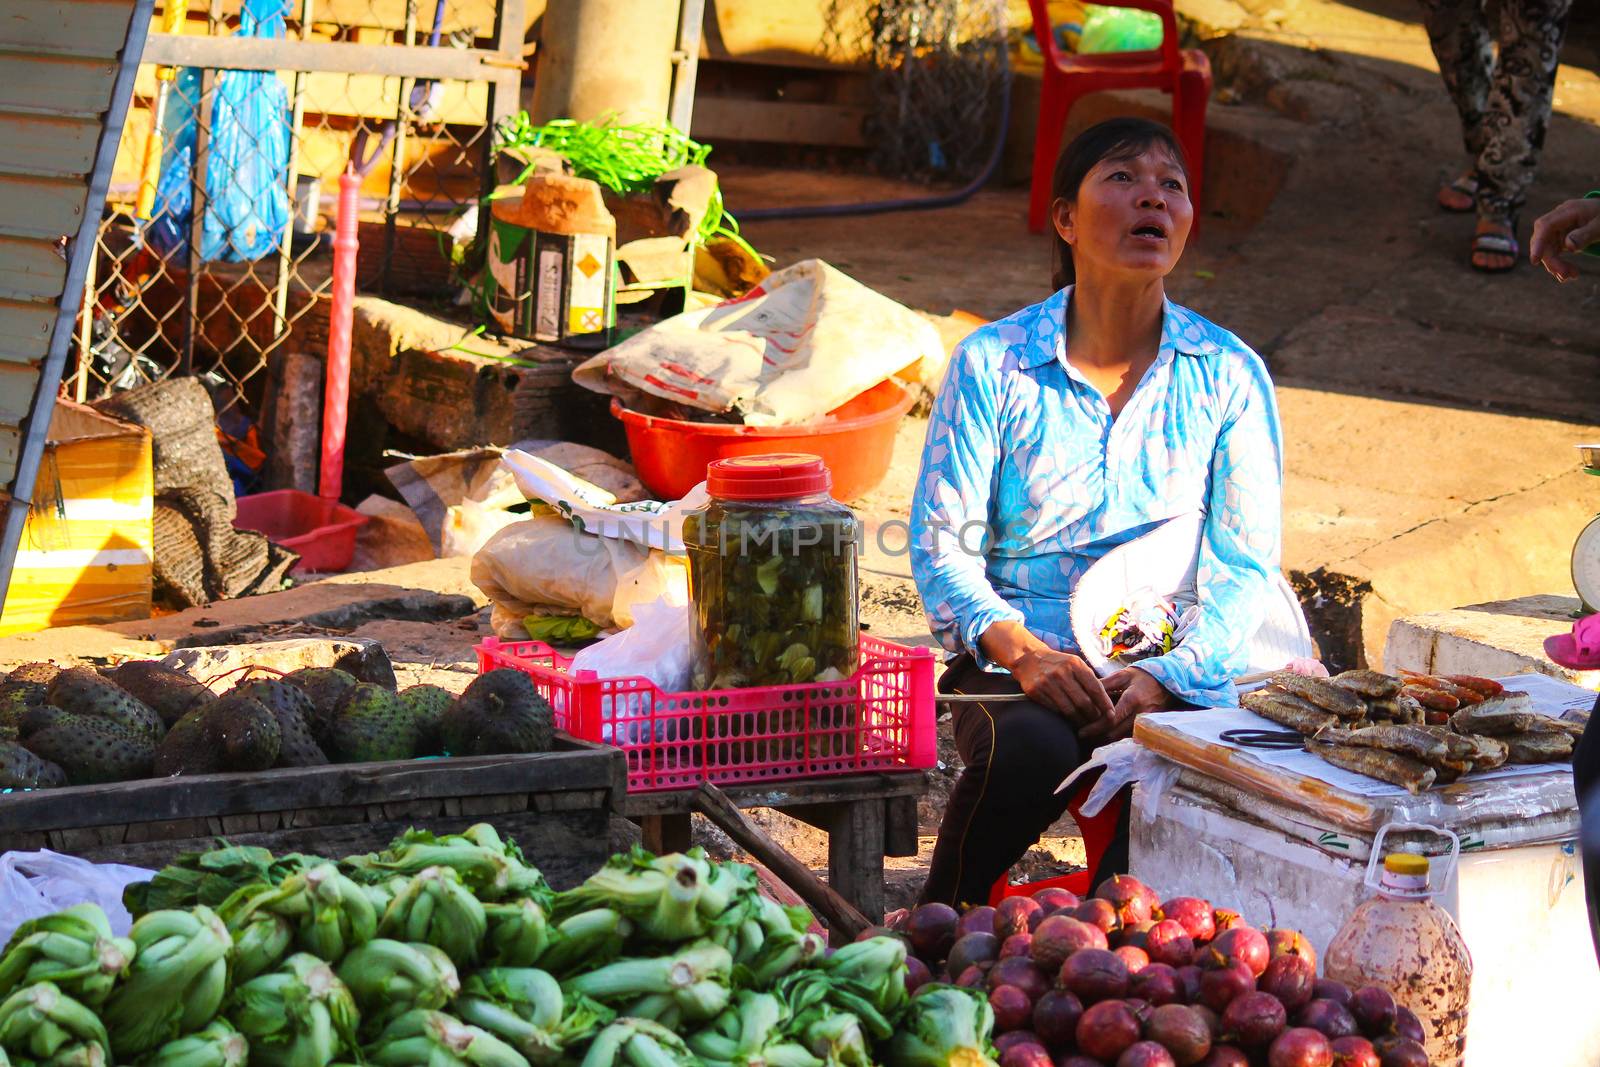 Editorial. Vietnamese woman selling fresh produce on the side of the street in Quy Nhon, Vietnam